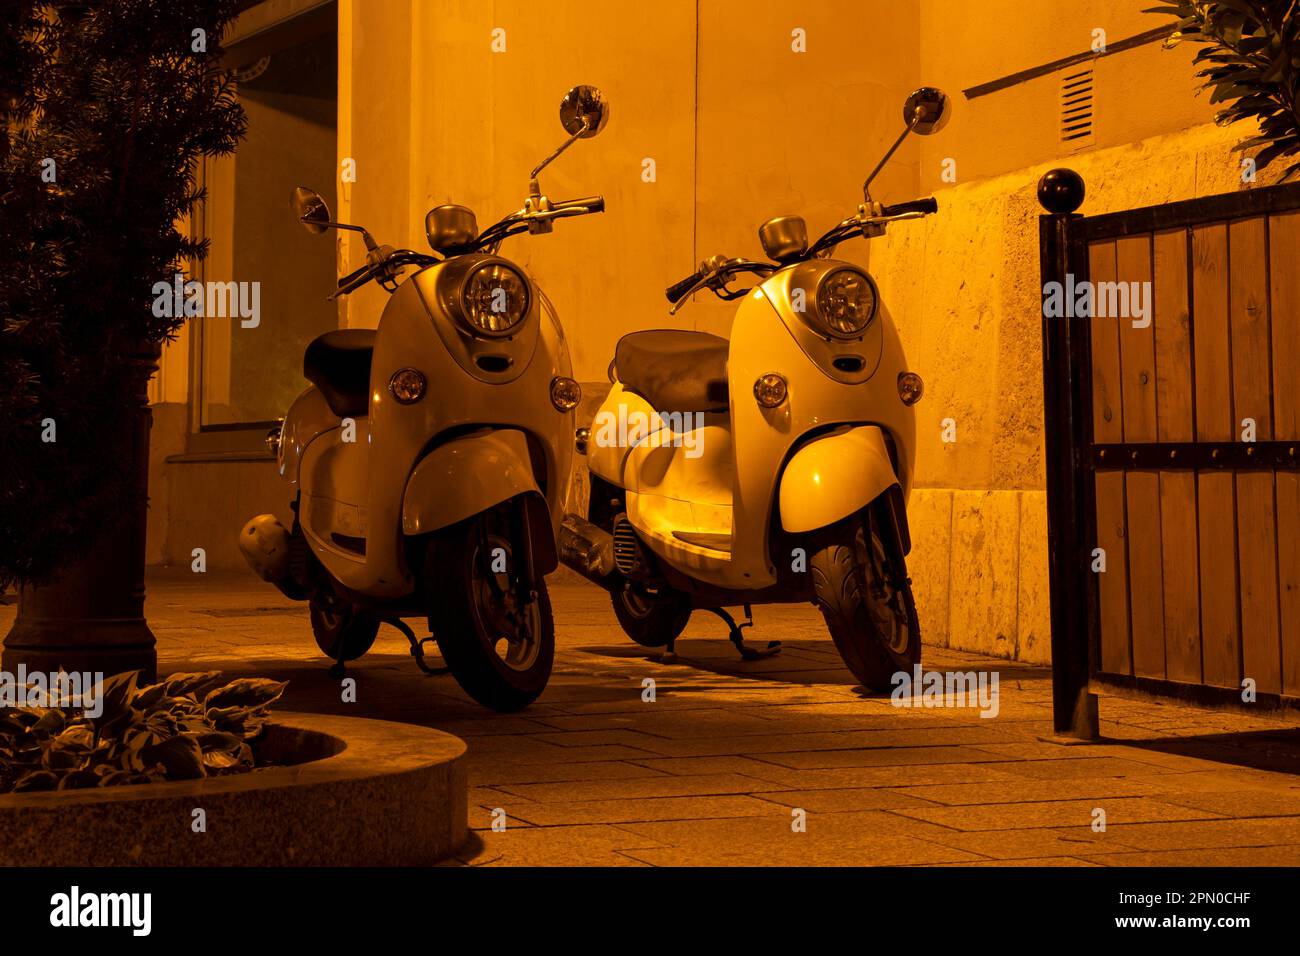 Two classic retro scooters on the street at night in yellowish lamplight Stock Photo